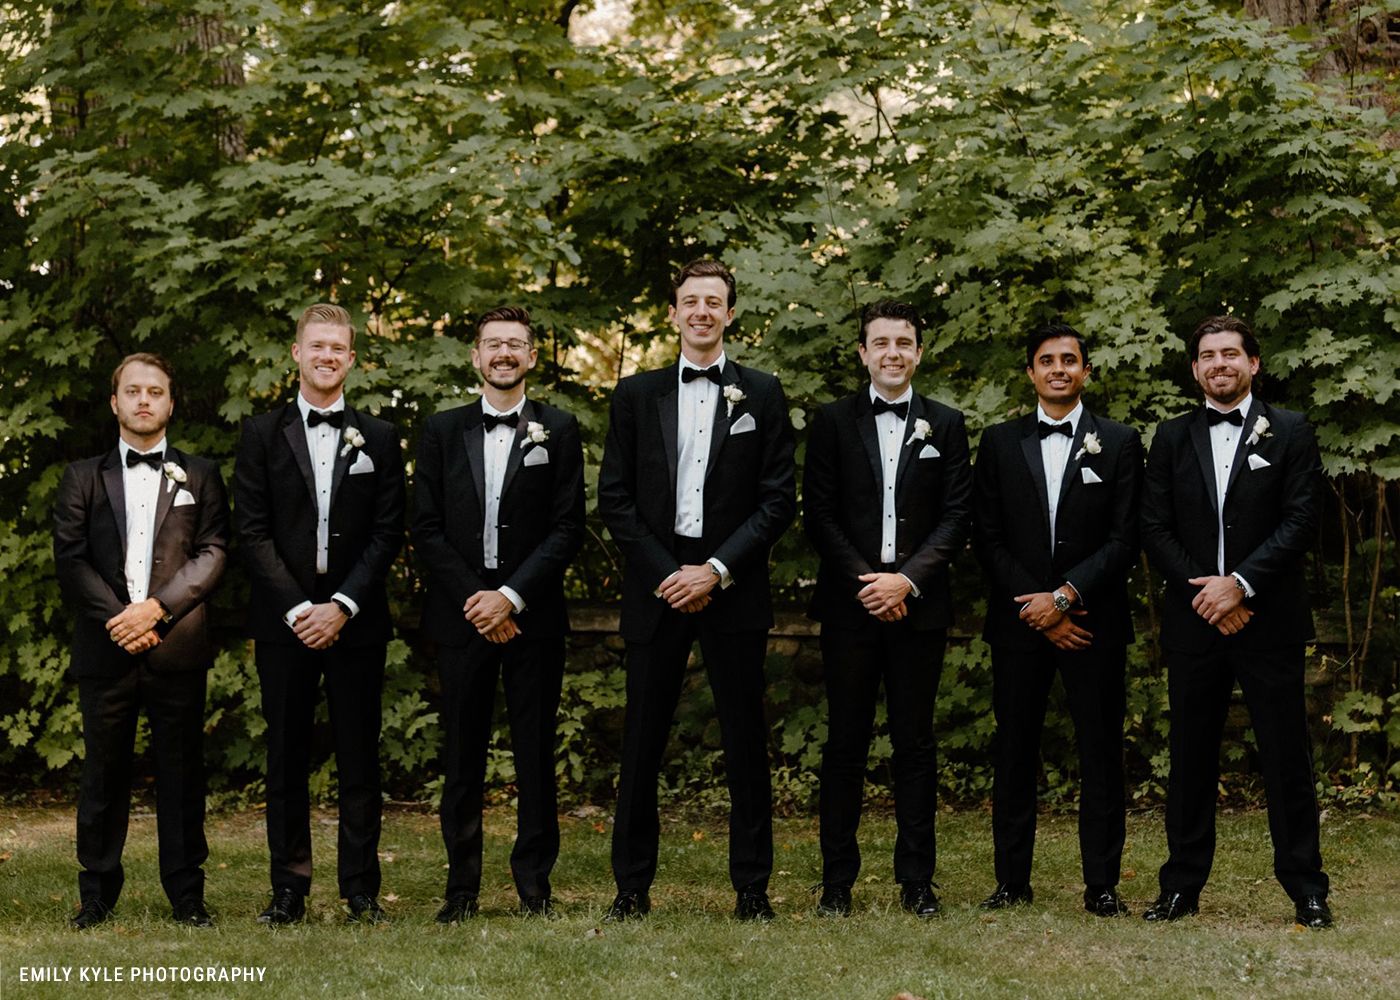 Seven men in suits standing in a line